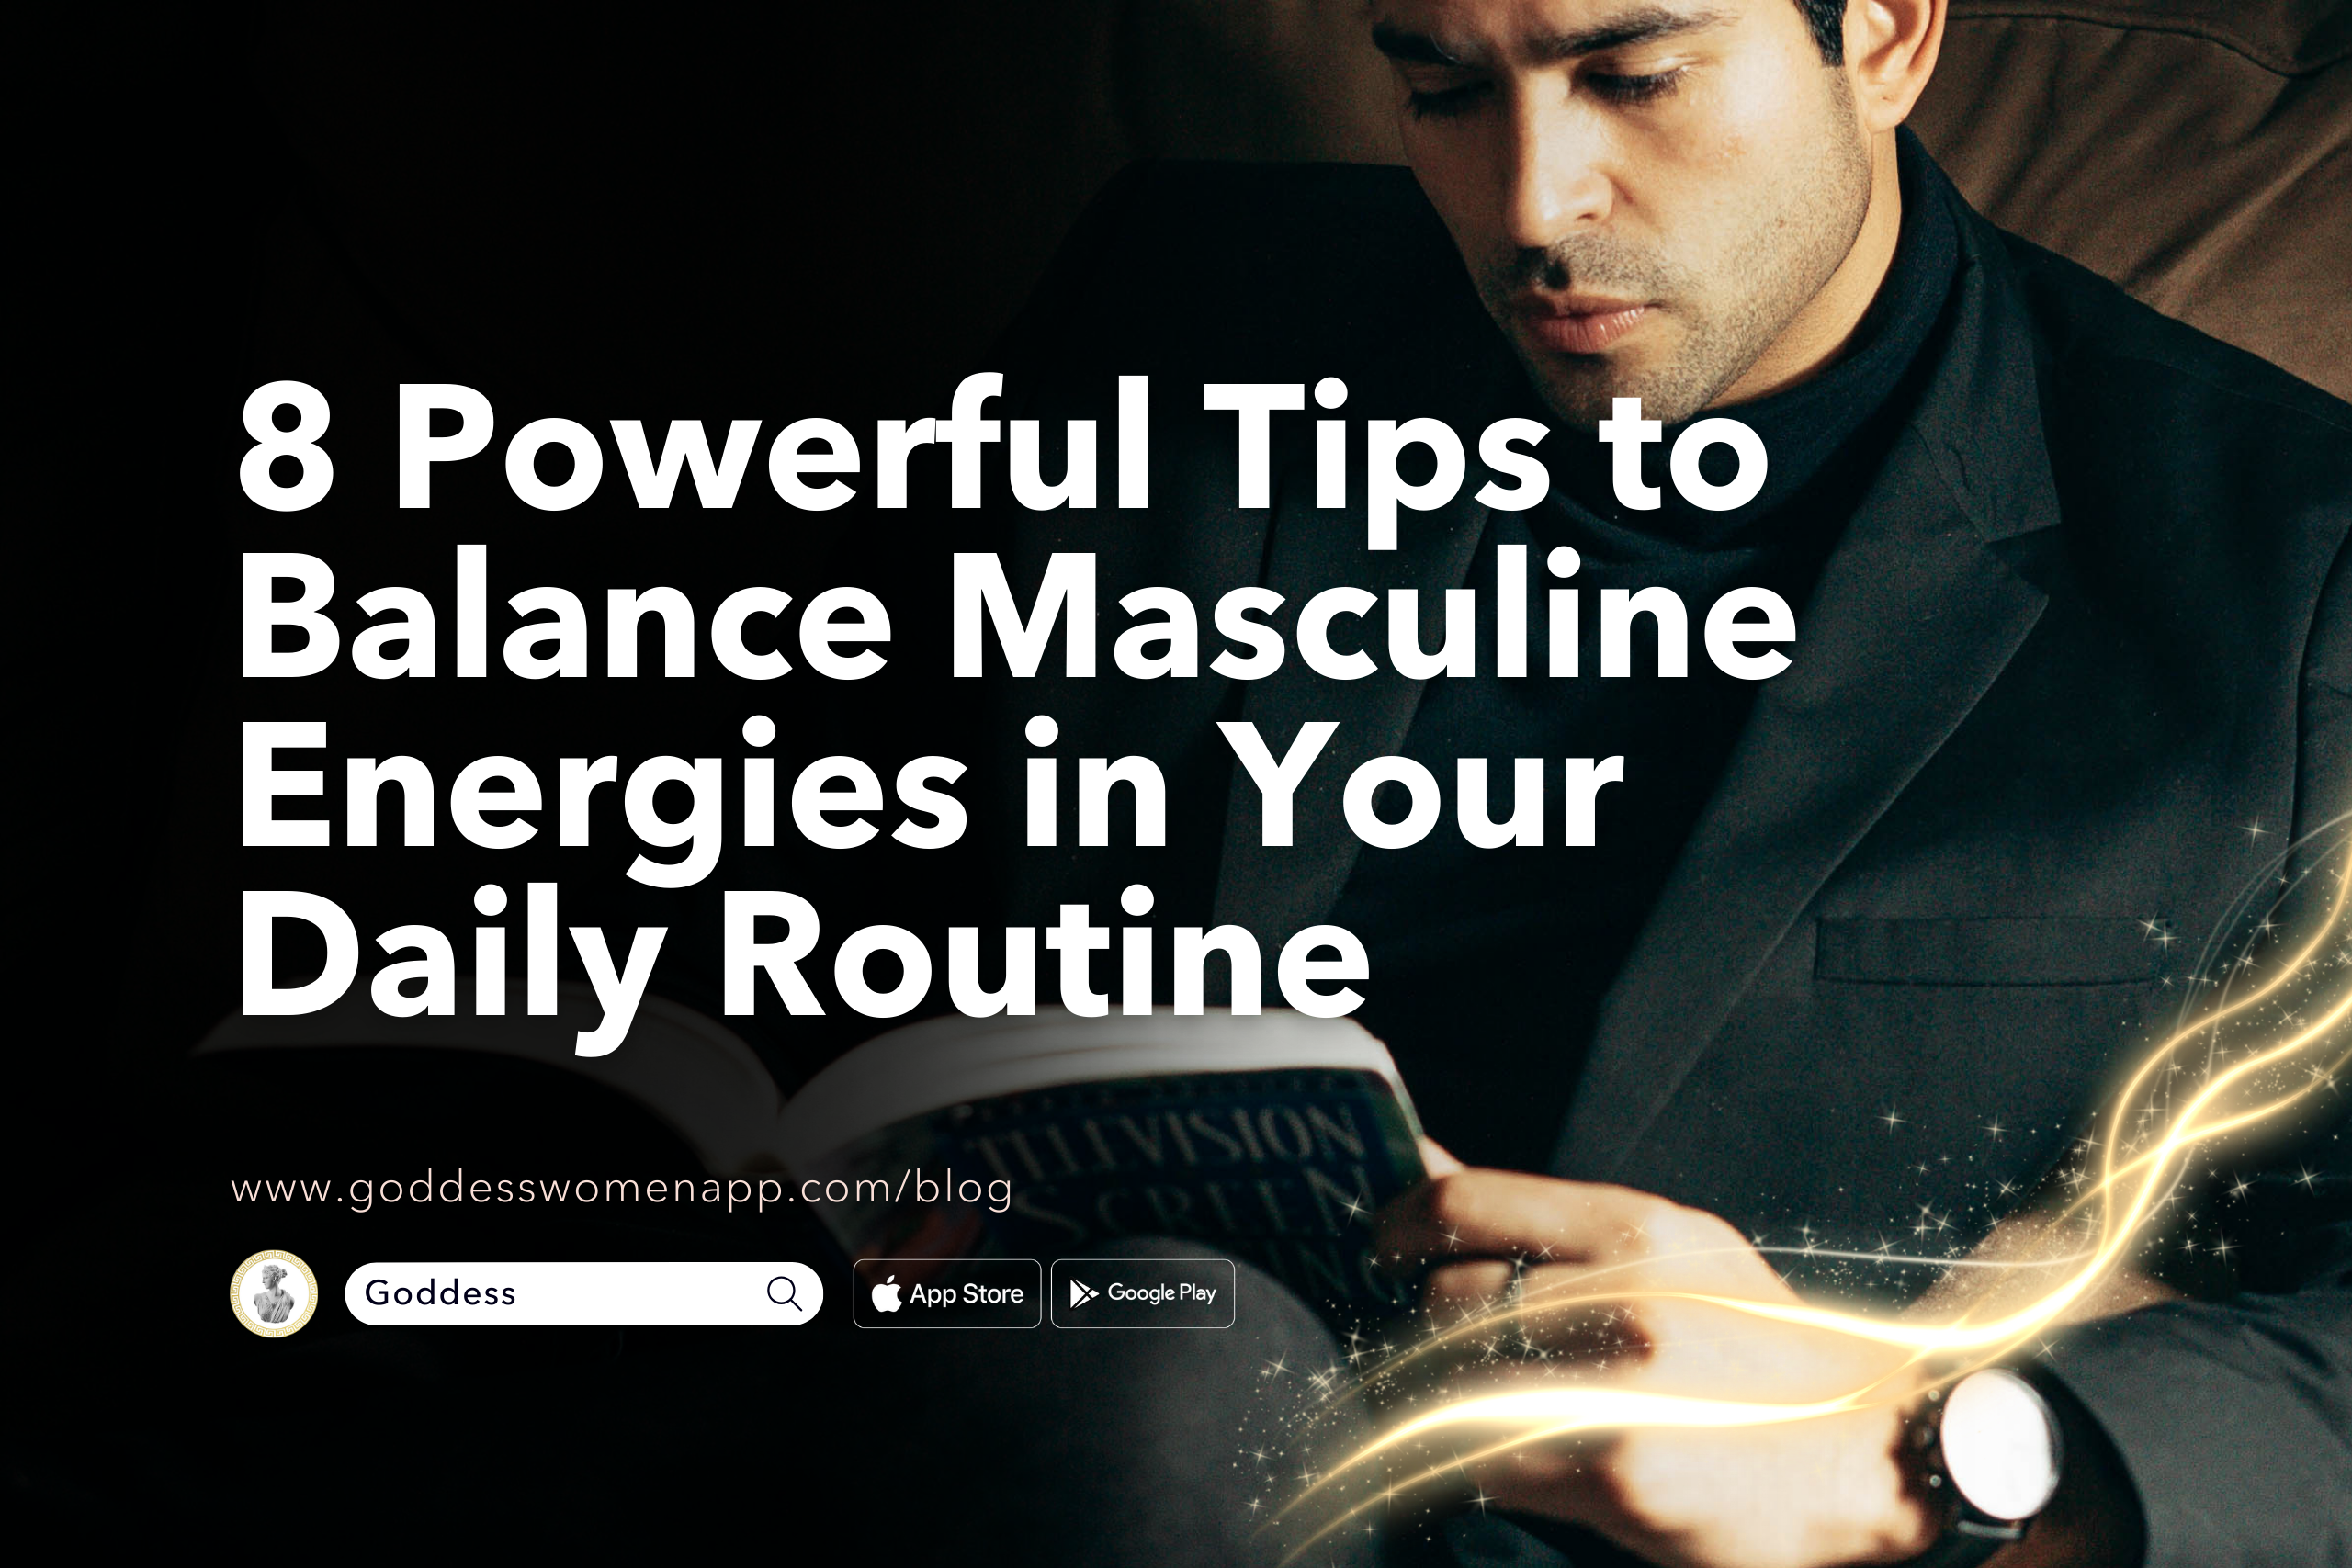 8 Powerful Tips to Balance Masculine Energies in Your Daily Routine